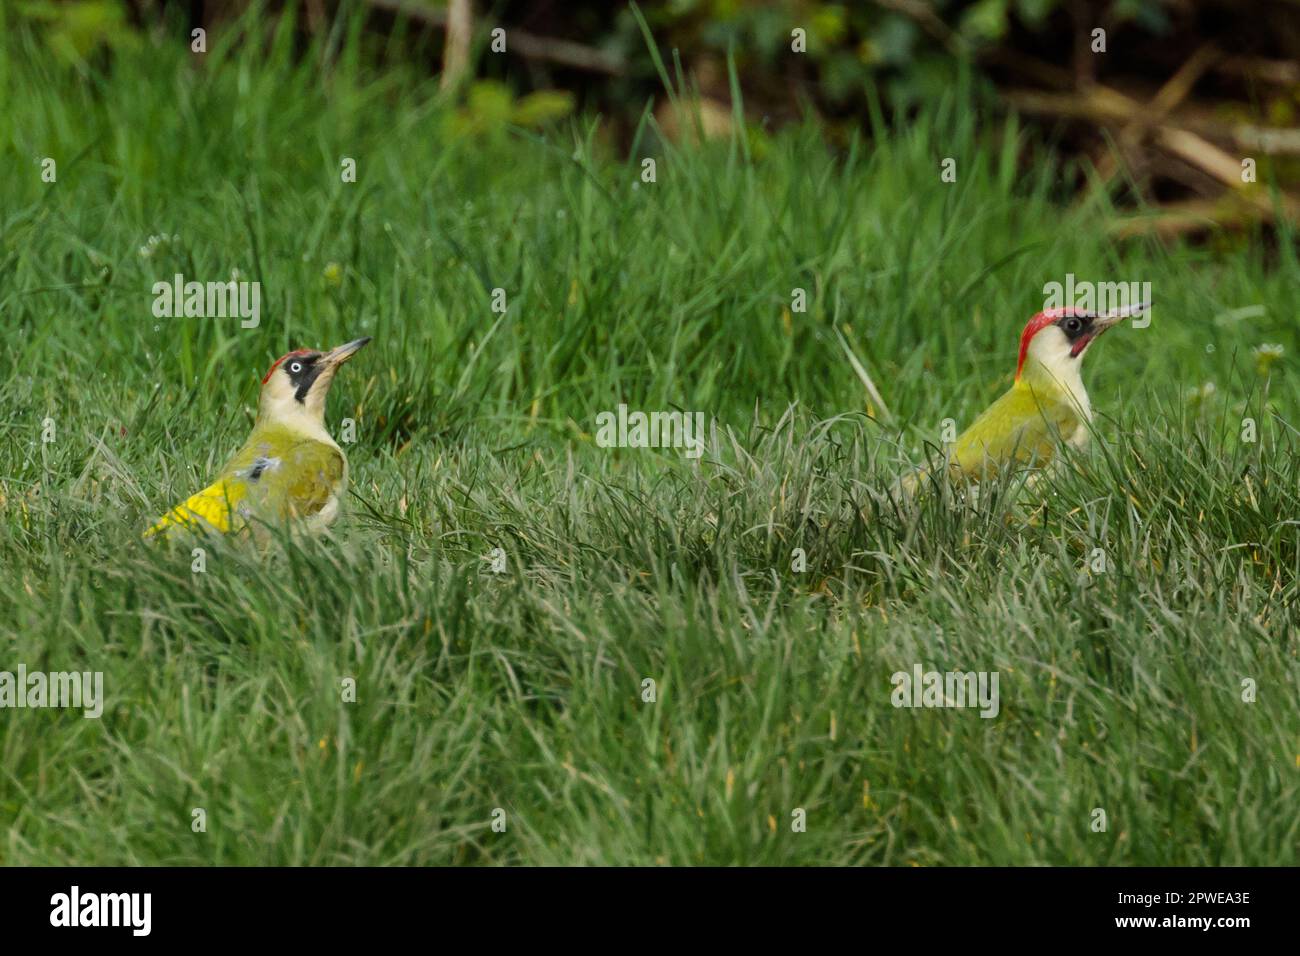 Female and Male European Green Woodpeckers, Picus viridis, on grass. Photo by Amanda Rose/Alamy Stock Photo